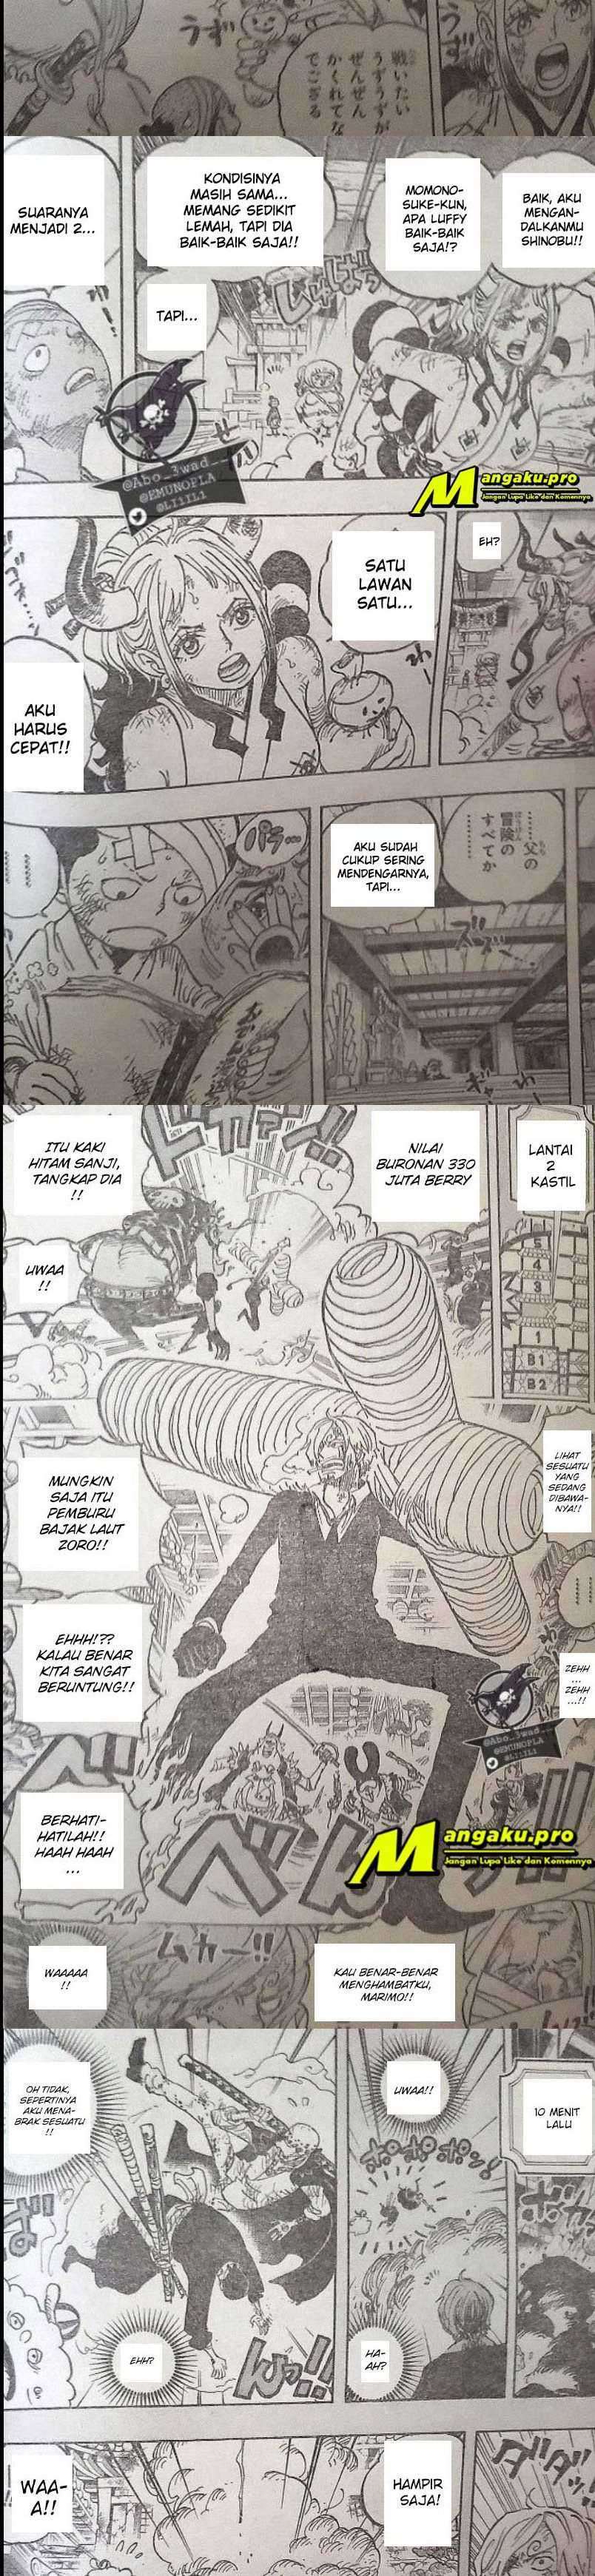 One Piece Chapter 1012 Lq - 41